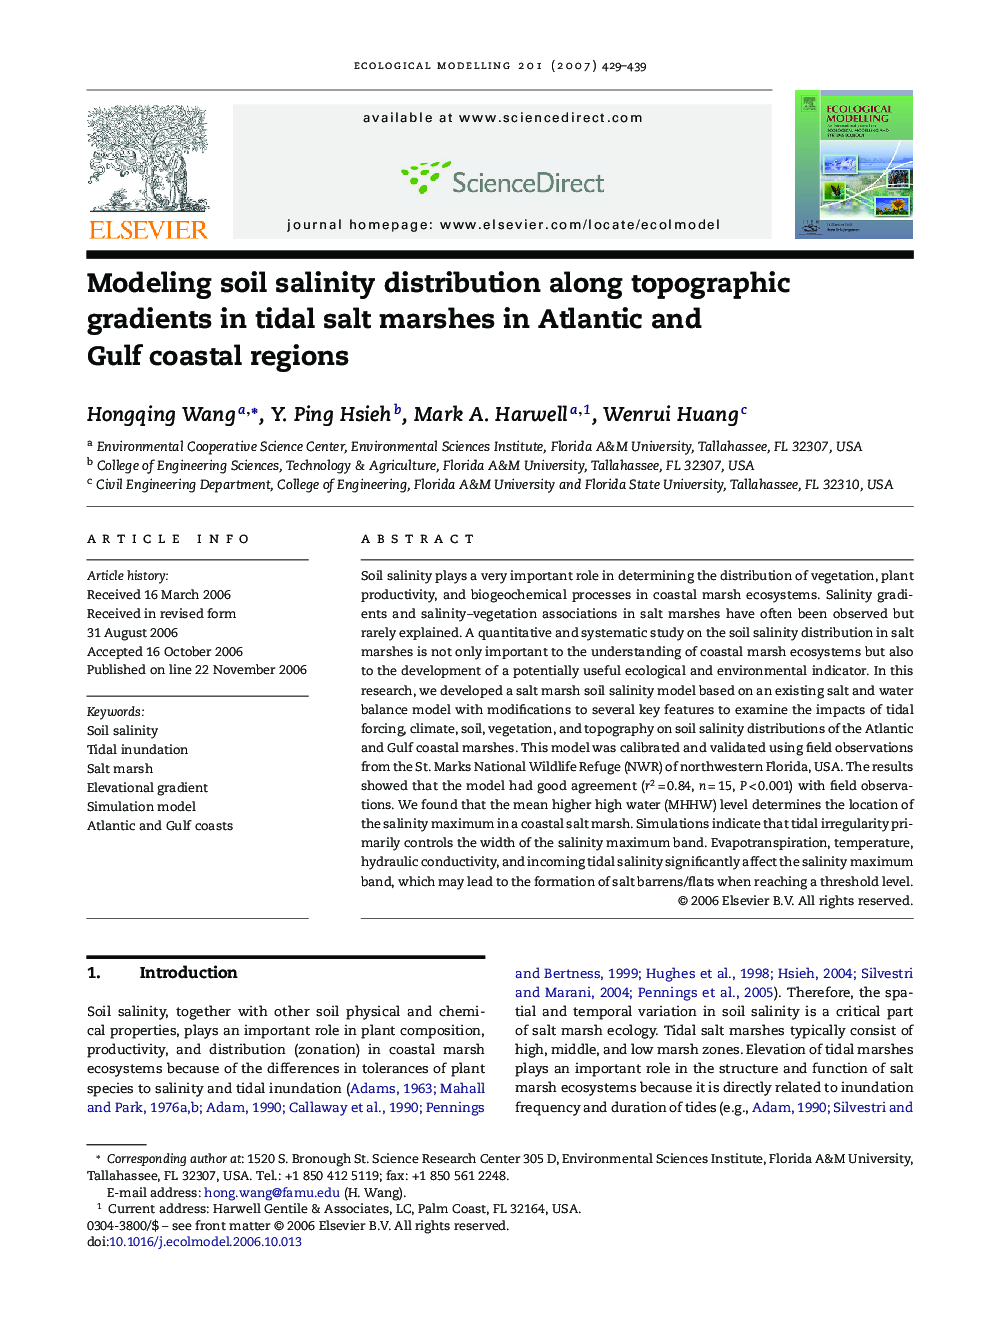 Modeling soil salinity distribution along topographic gradients in tidal salt marshes in Atlantic and Gulf coastal regions